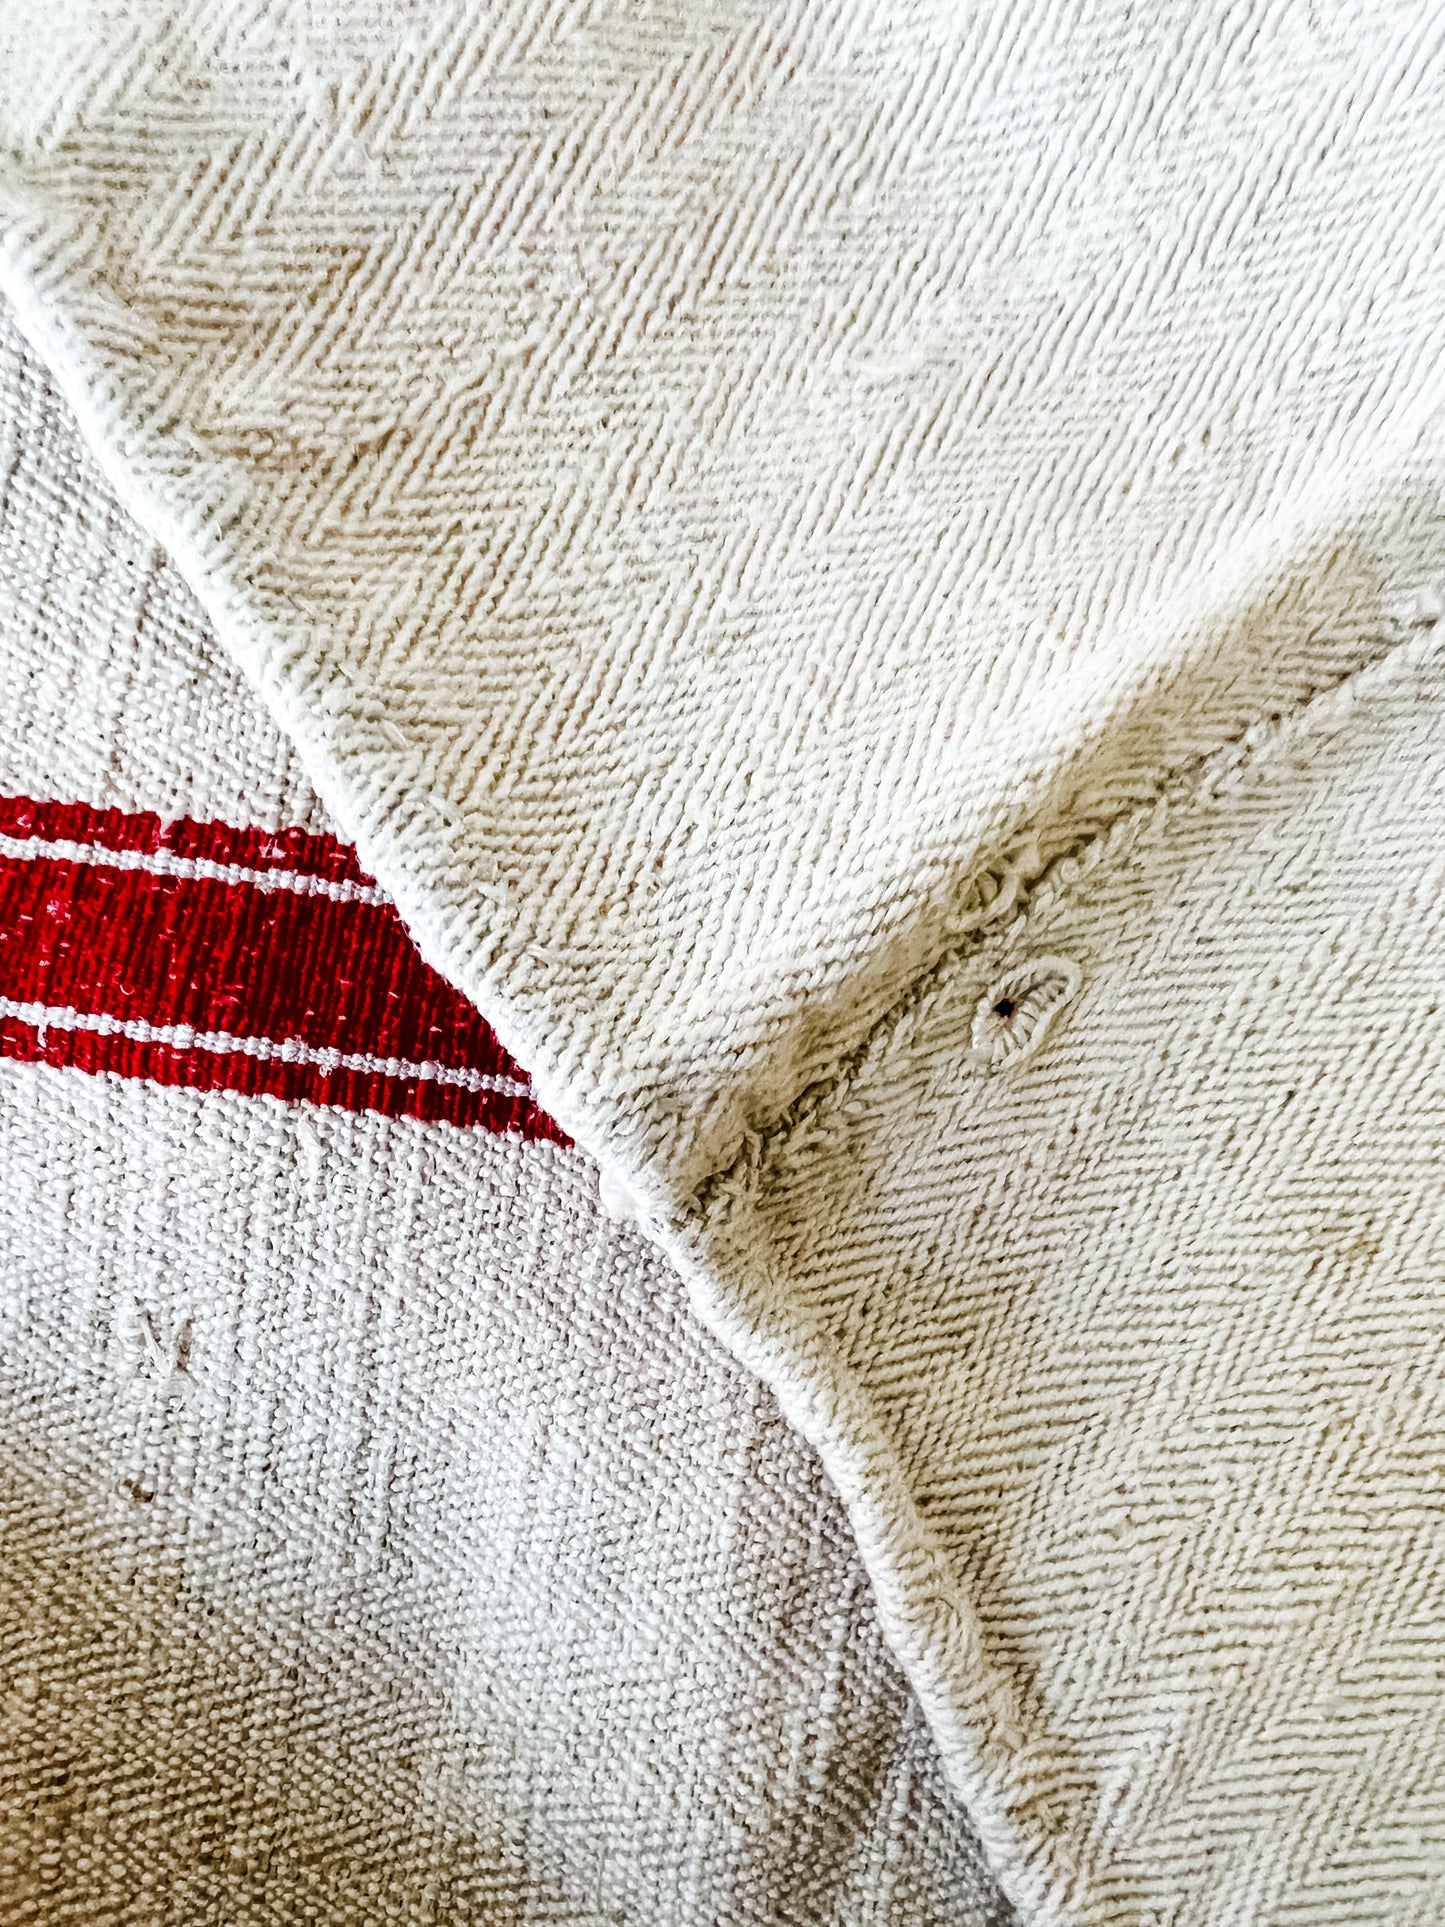 Vintage French Grain Sack (with red stripe)